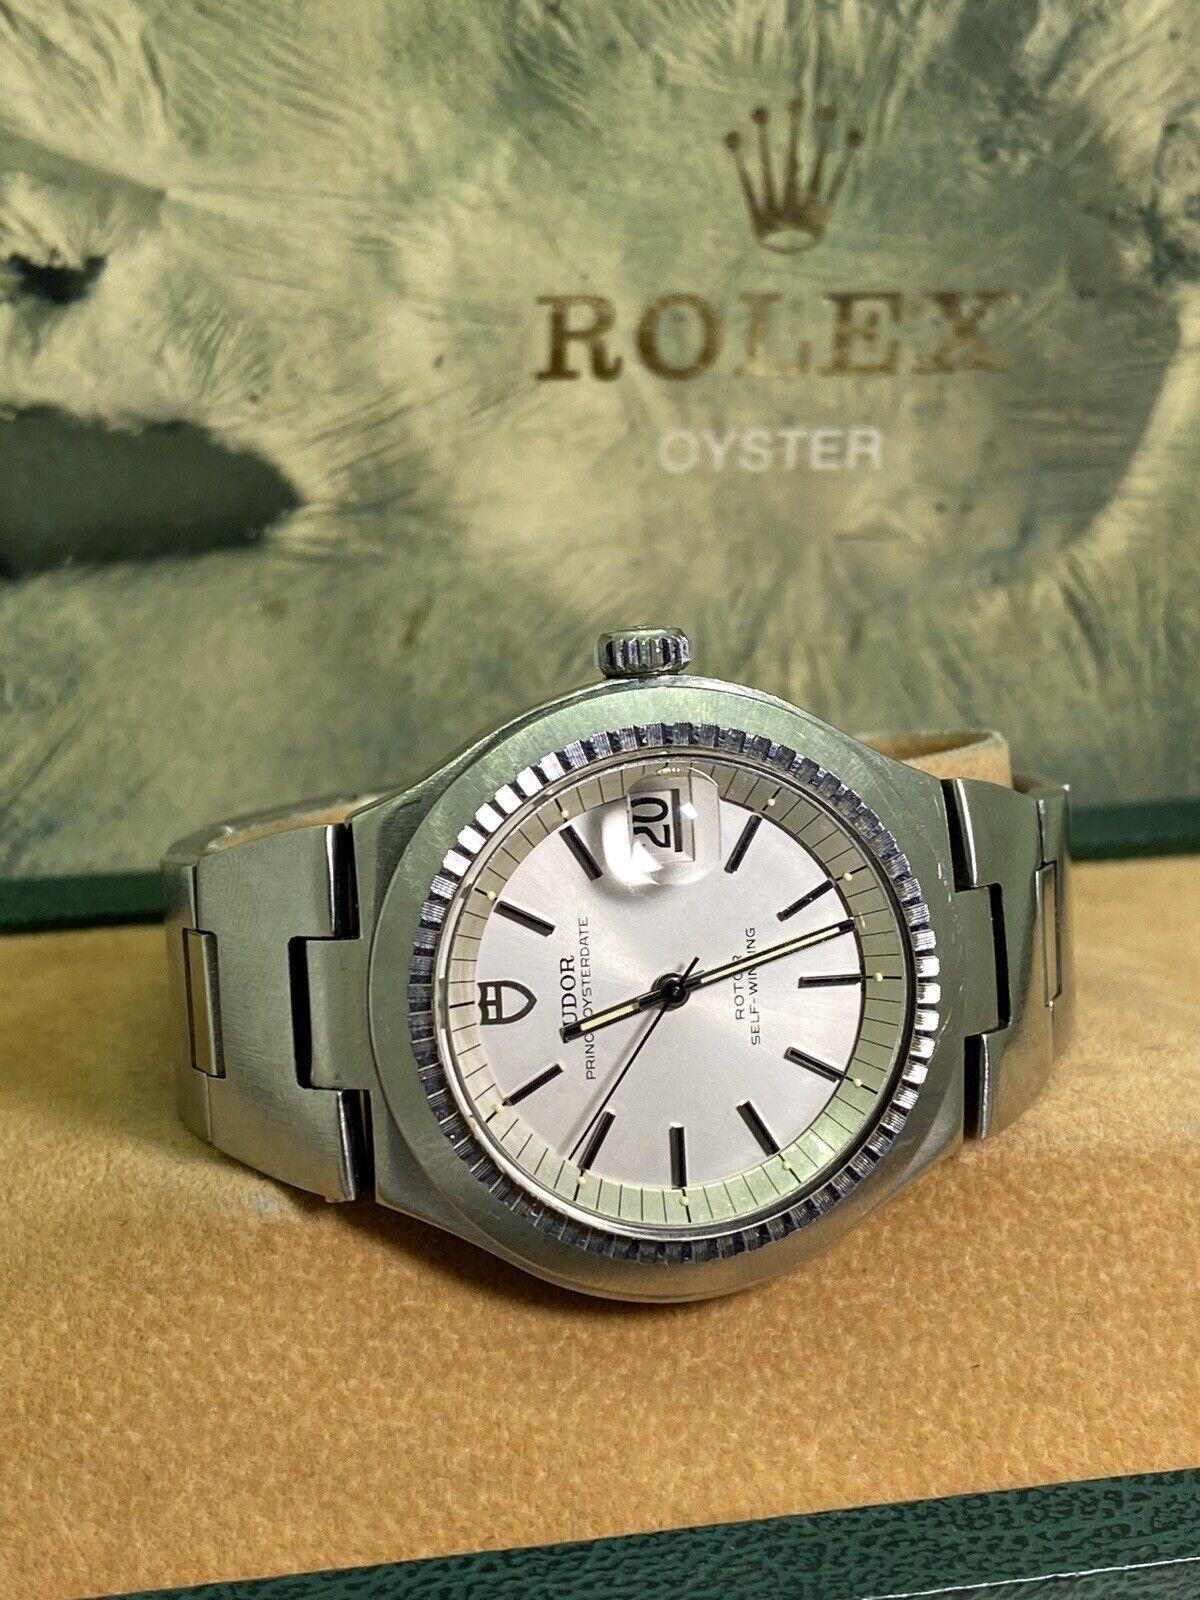 Fine & Rarely Seen Rolex Prince OysterDate by Tudor 